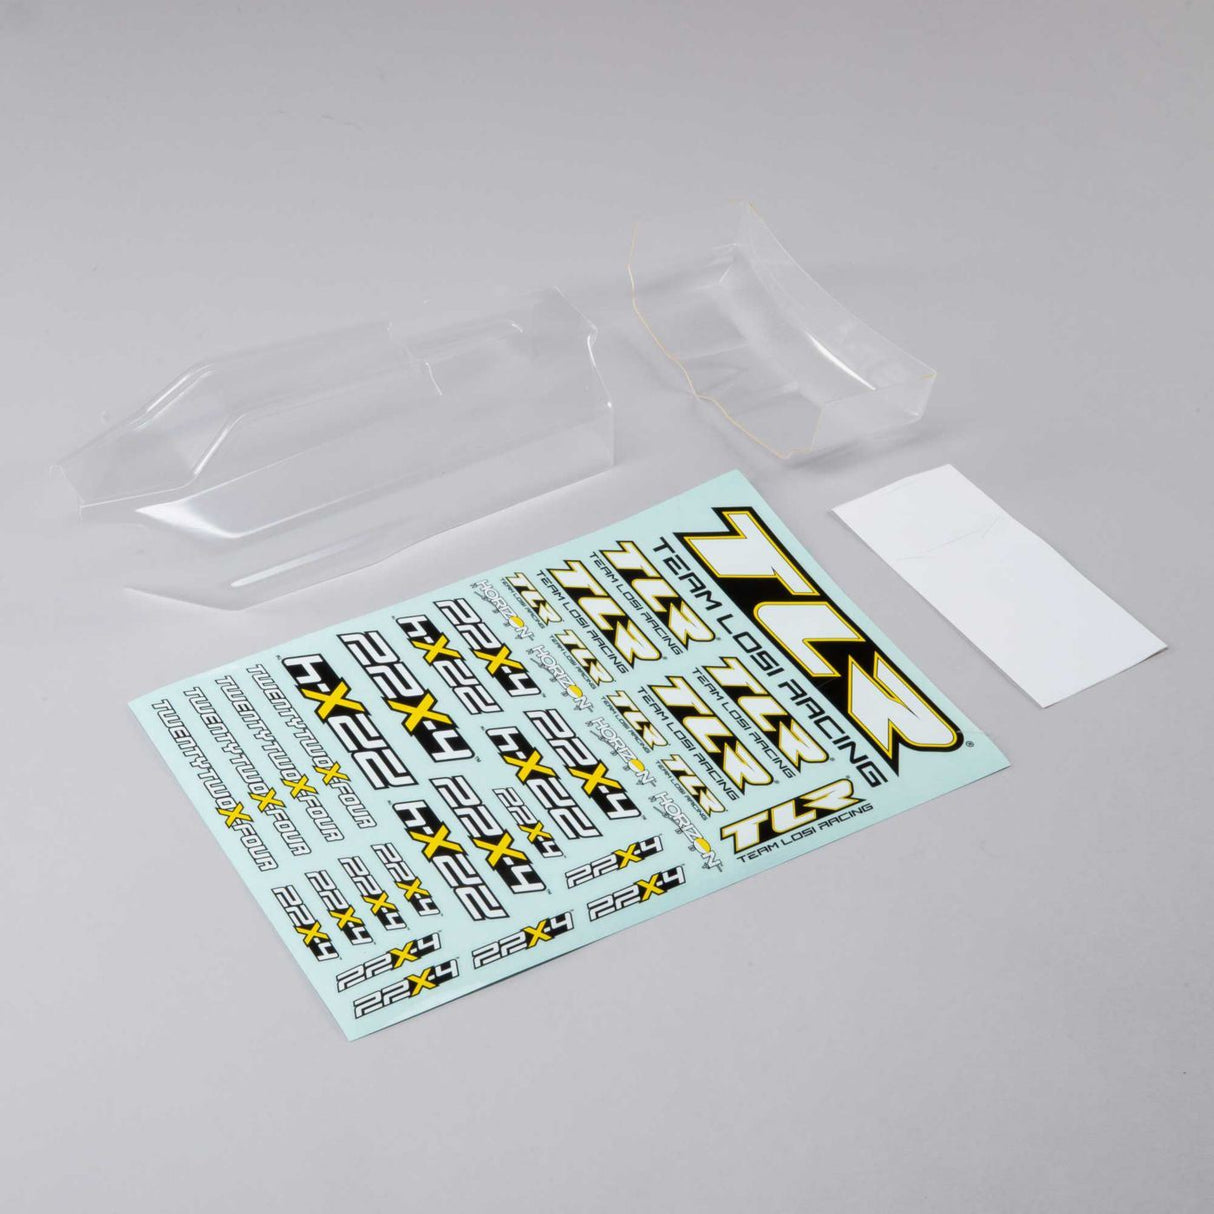 TLR Lightweight Body & Wing, Clear: 22X-4